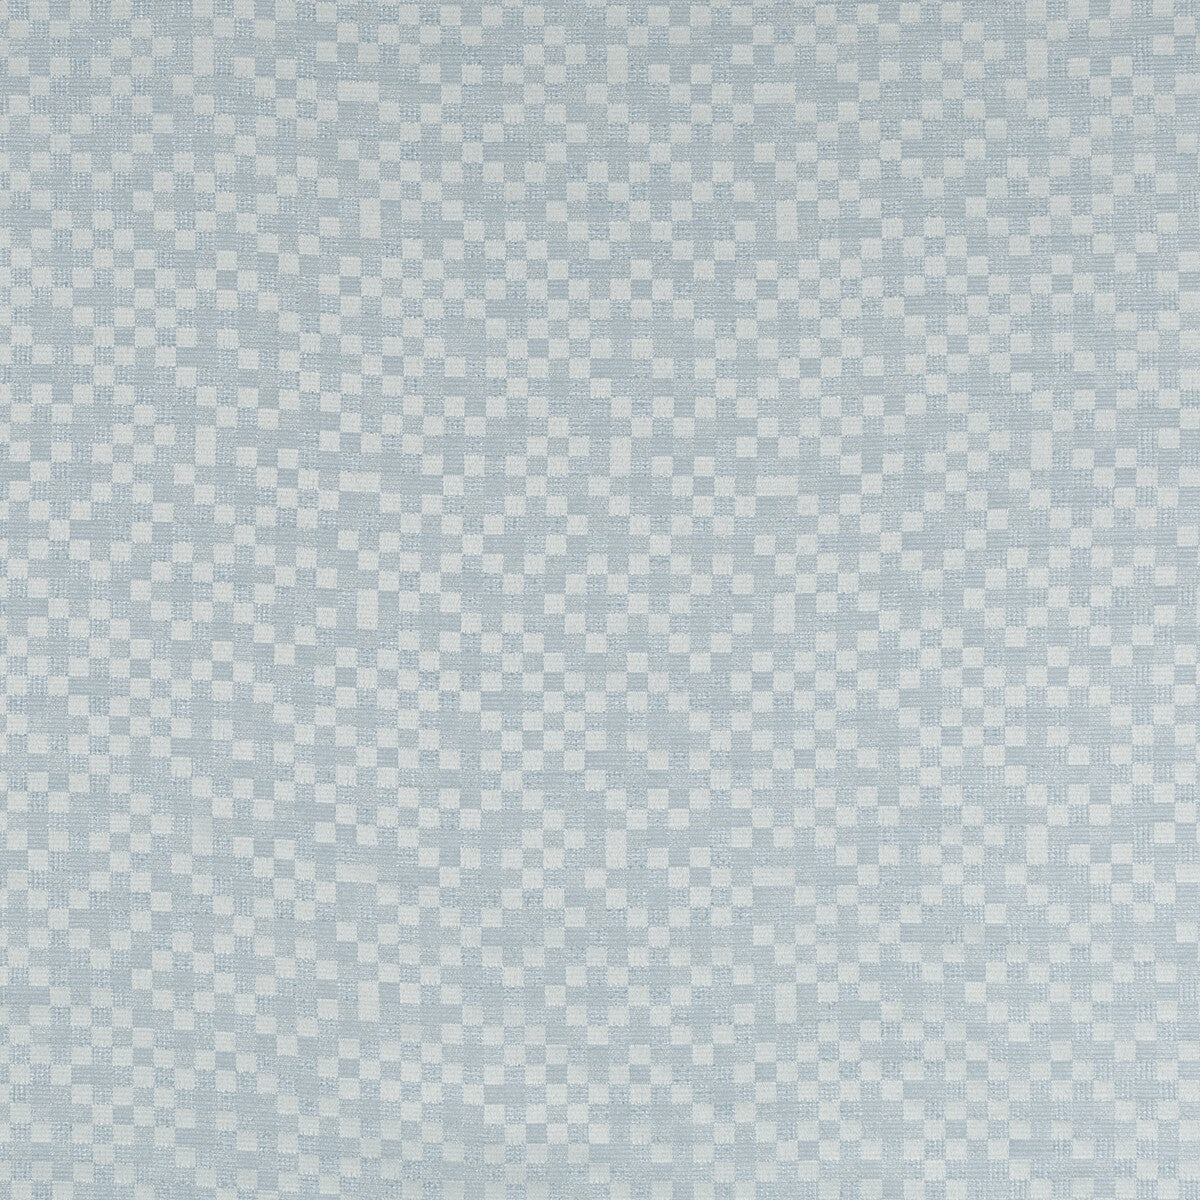 Levi fabric in sail color - pattern 4658.15.0 - by Kravet Contract